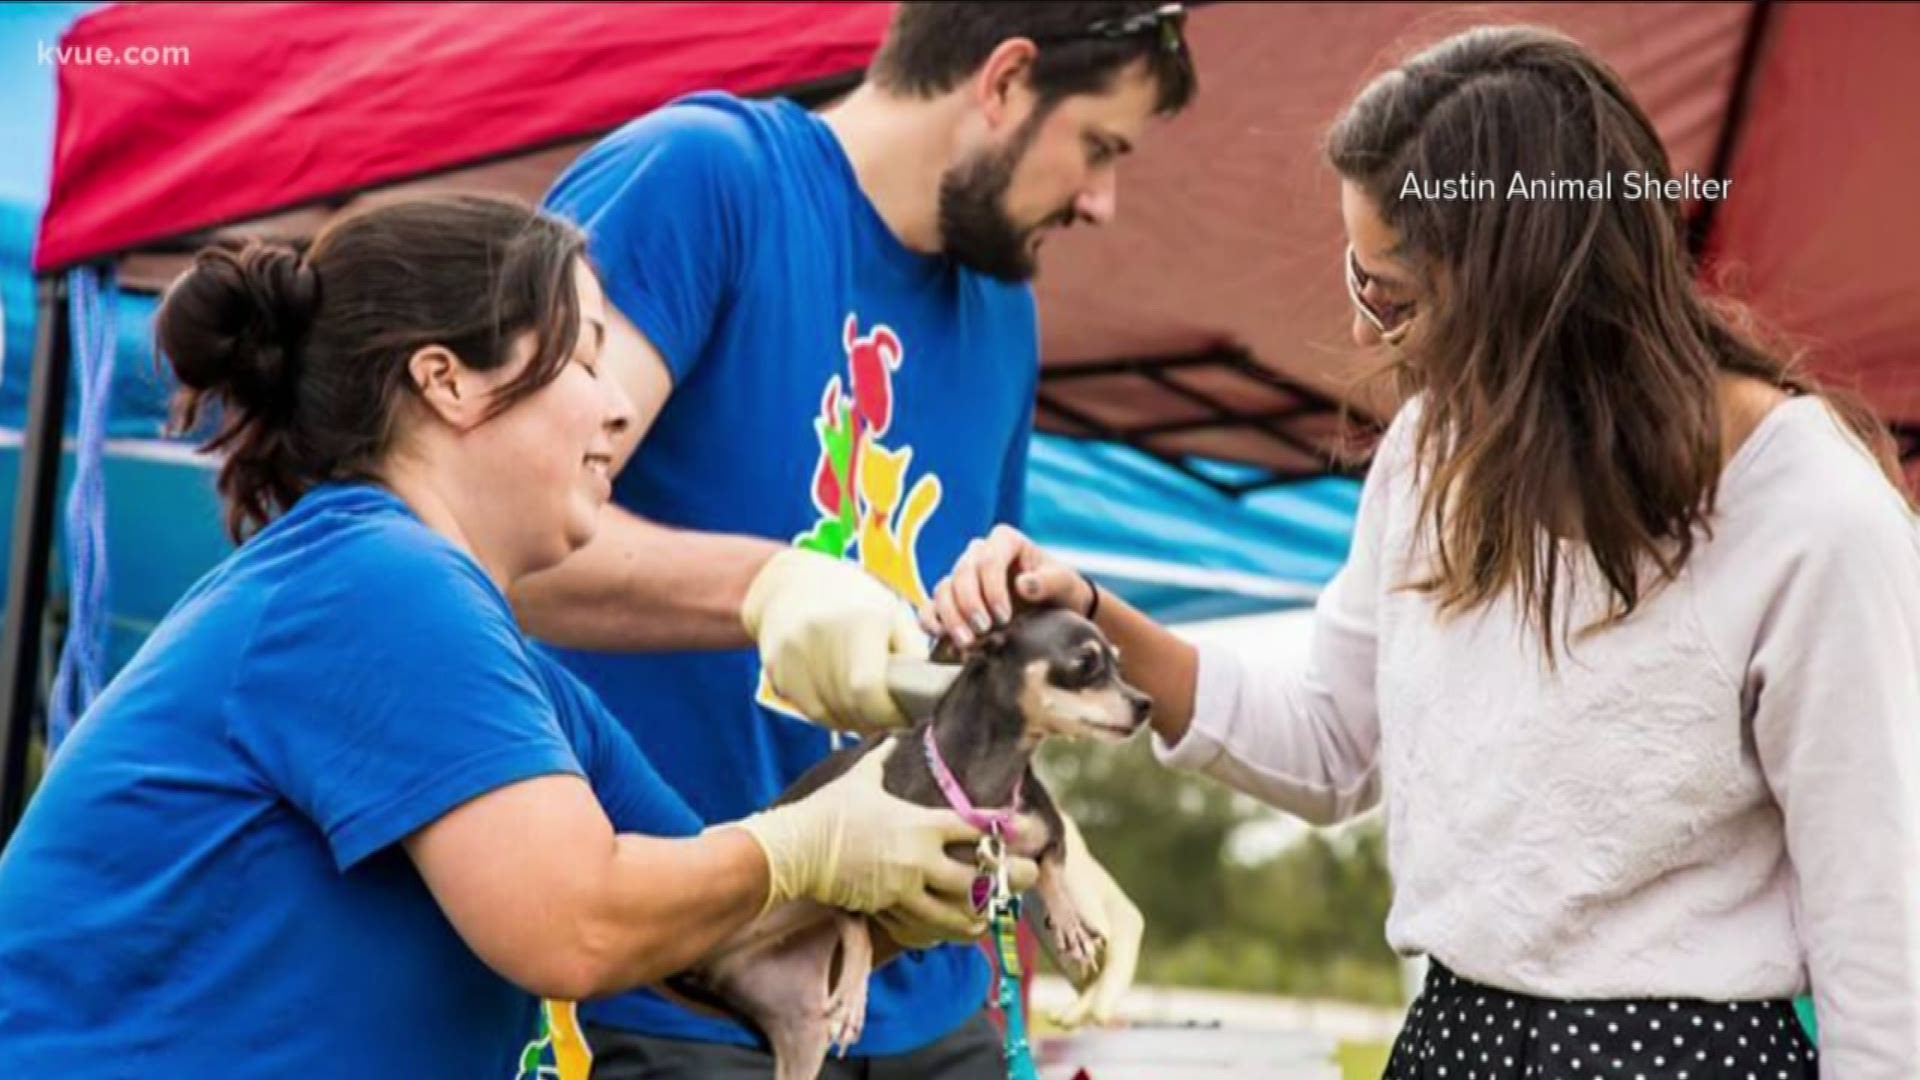 The Austin Animal Center is offering free rabies vaccines and microchips to cats and dogs Saturday morning at Richard Moya Park.